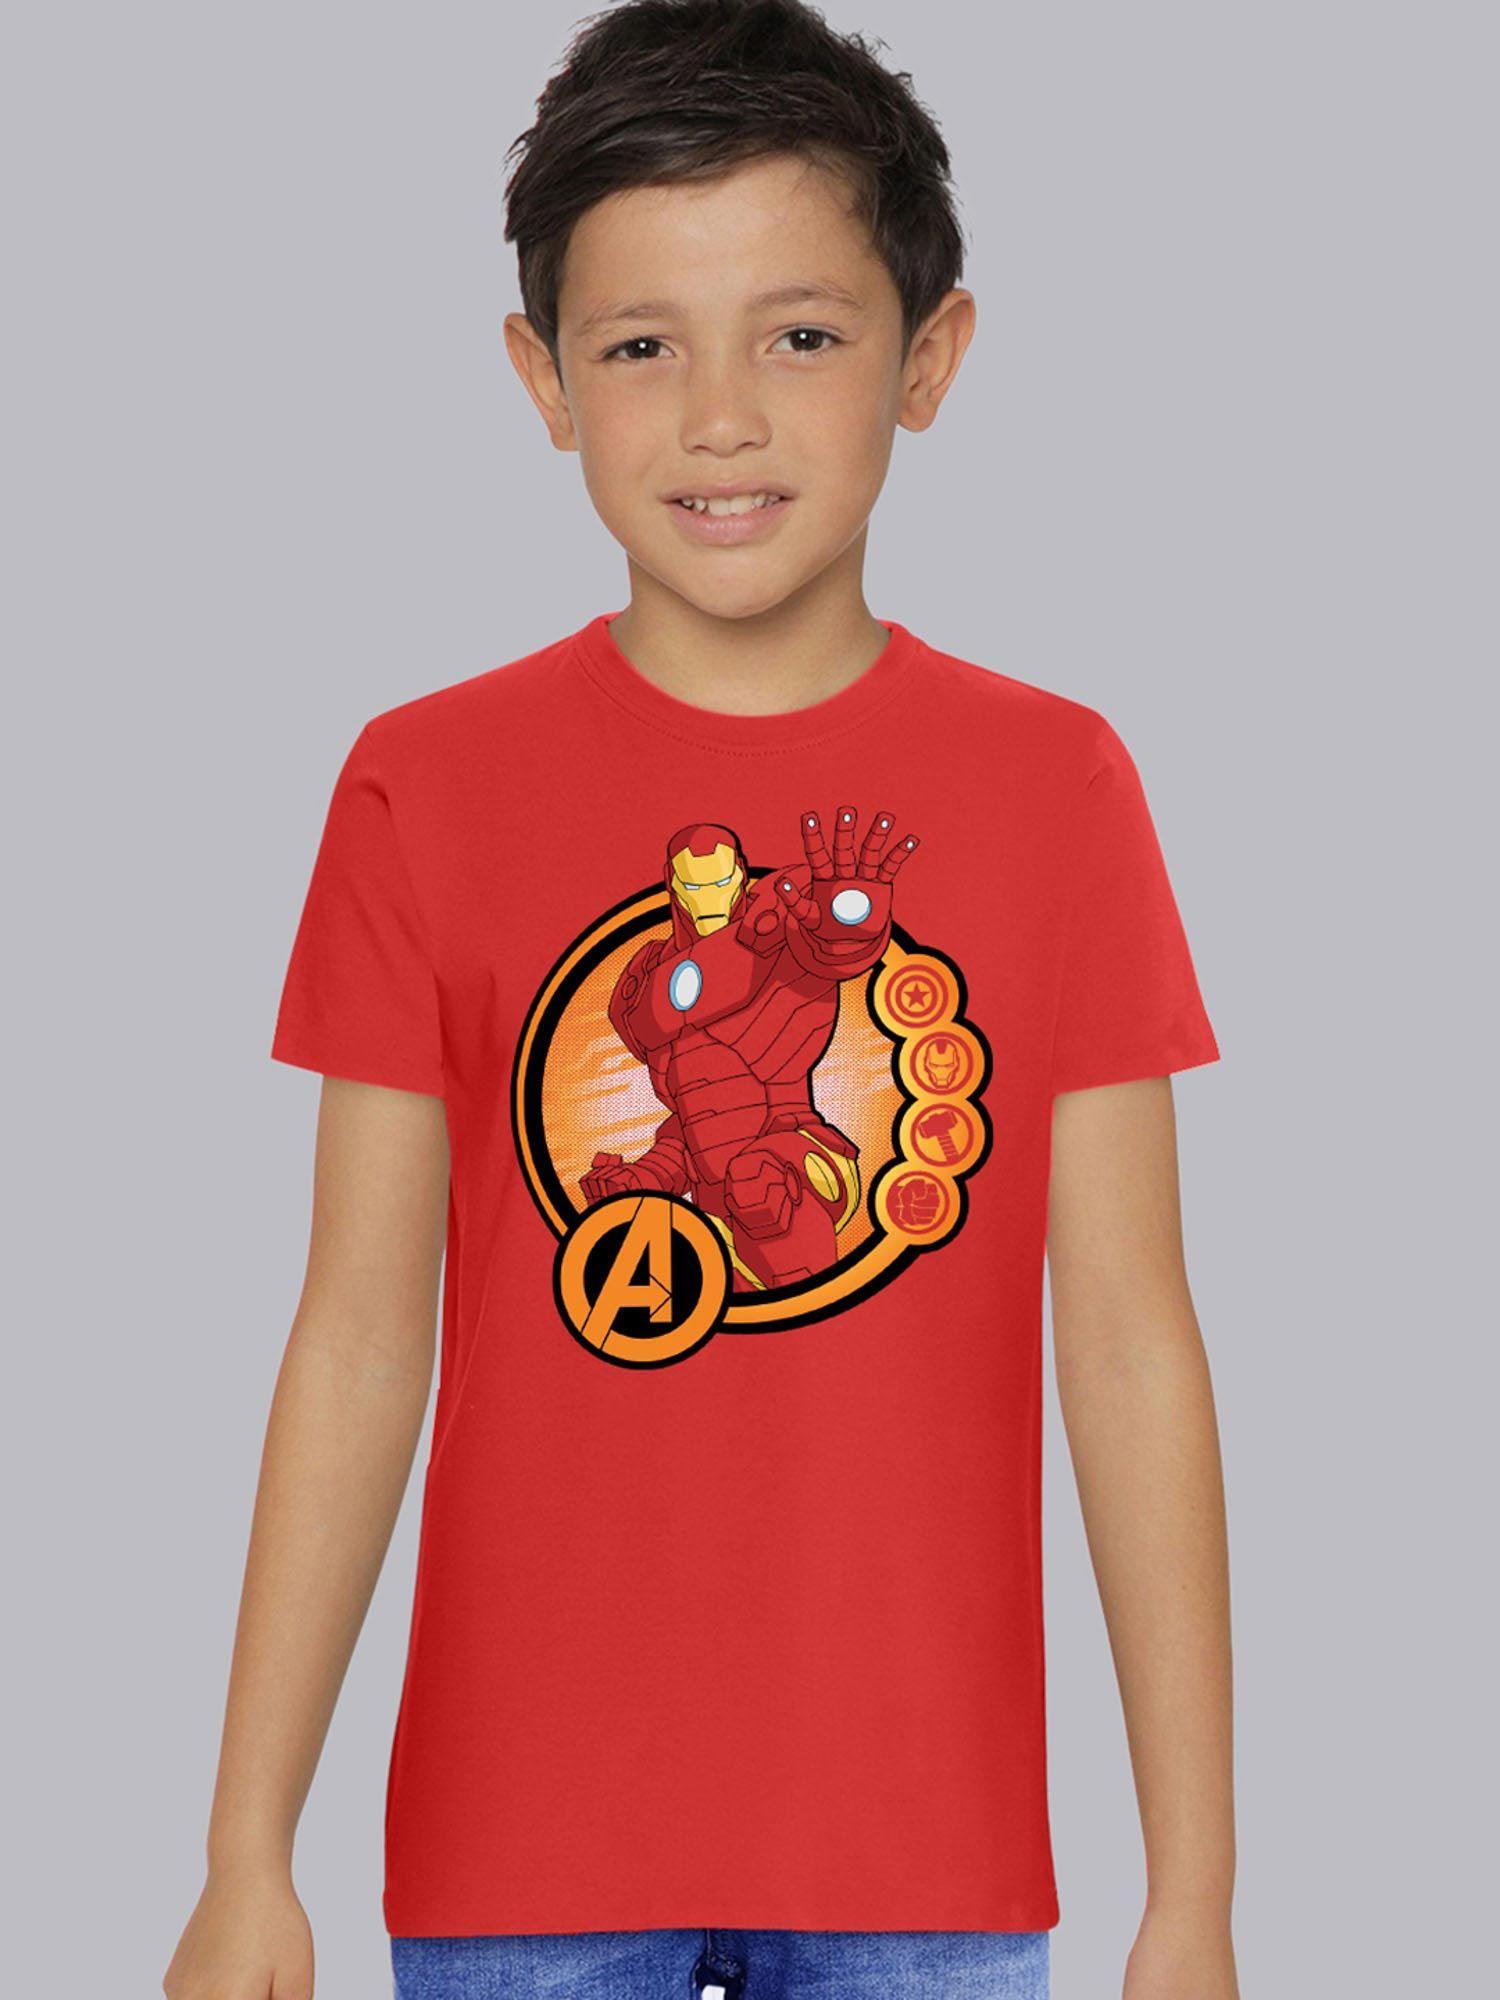 iron man regular fit crew neck bright red t-shirt for boys